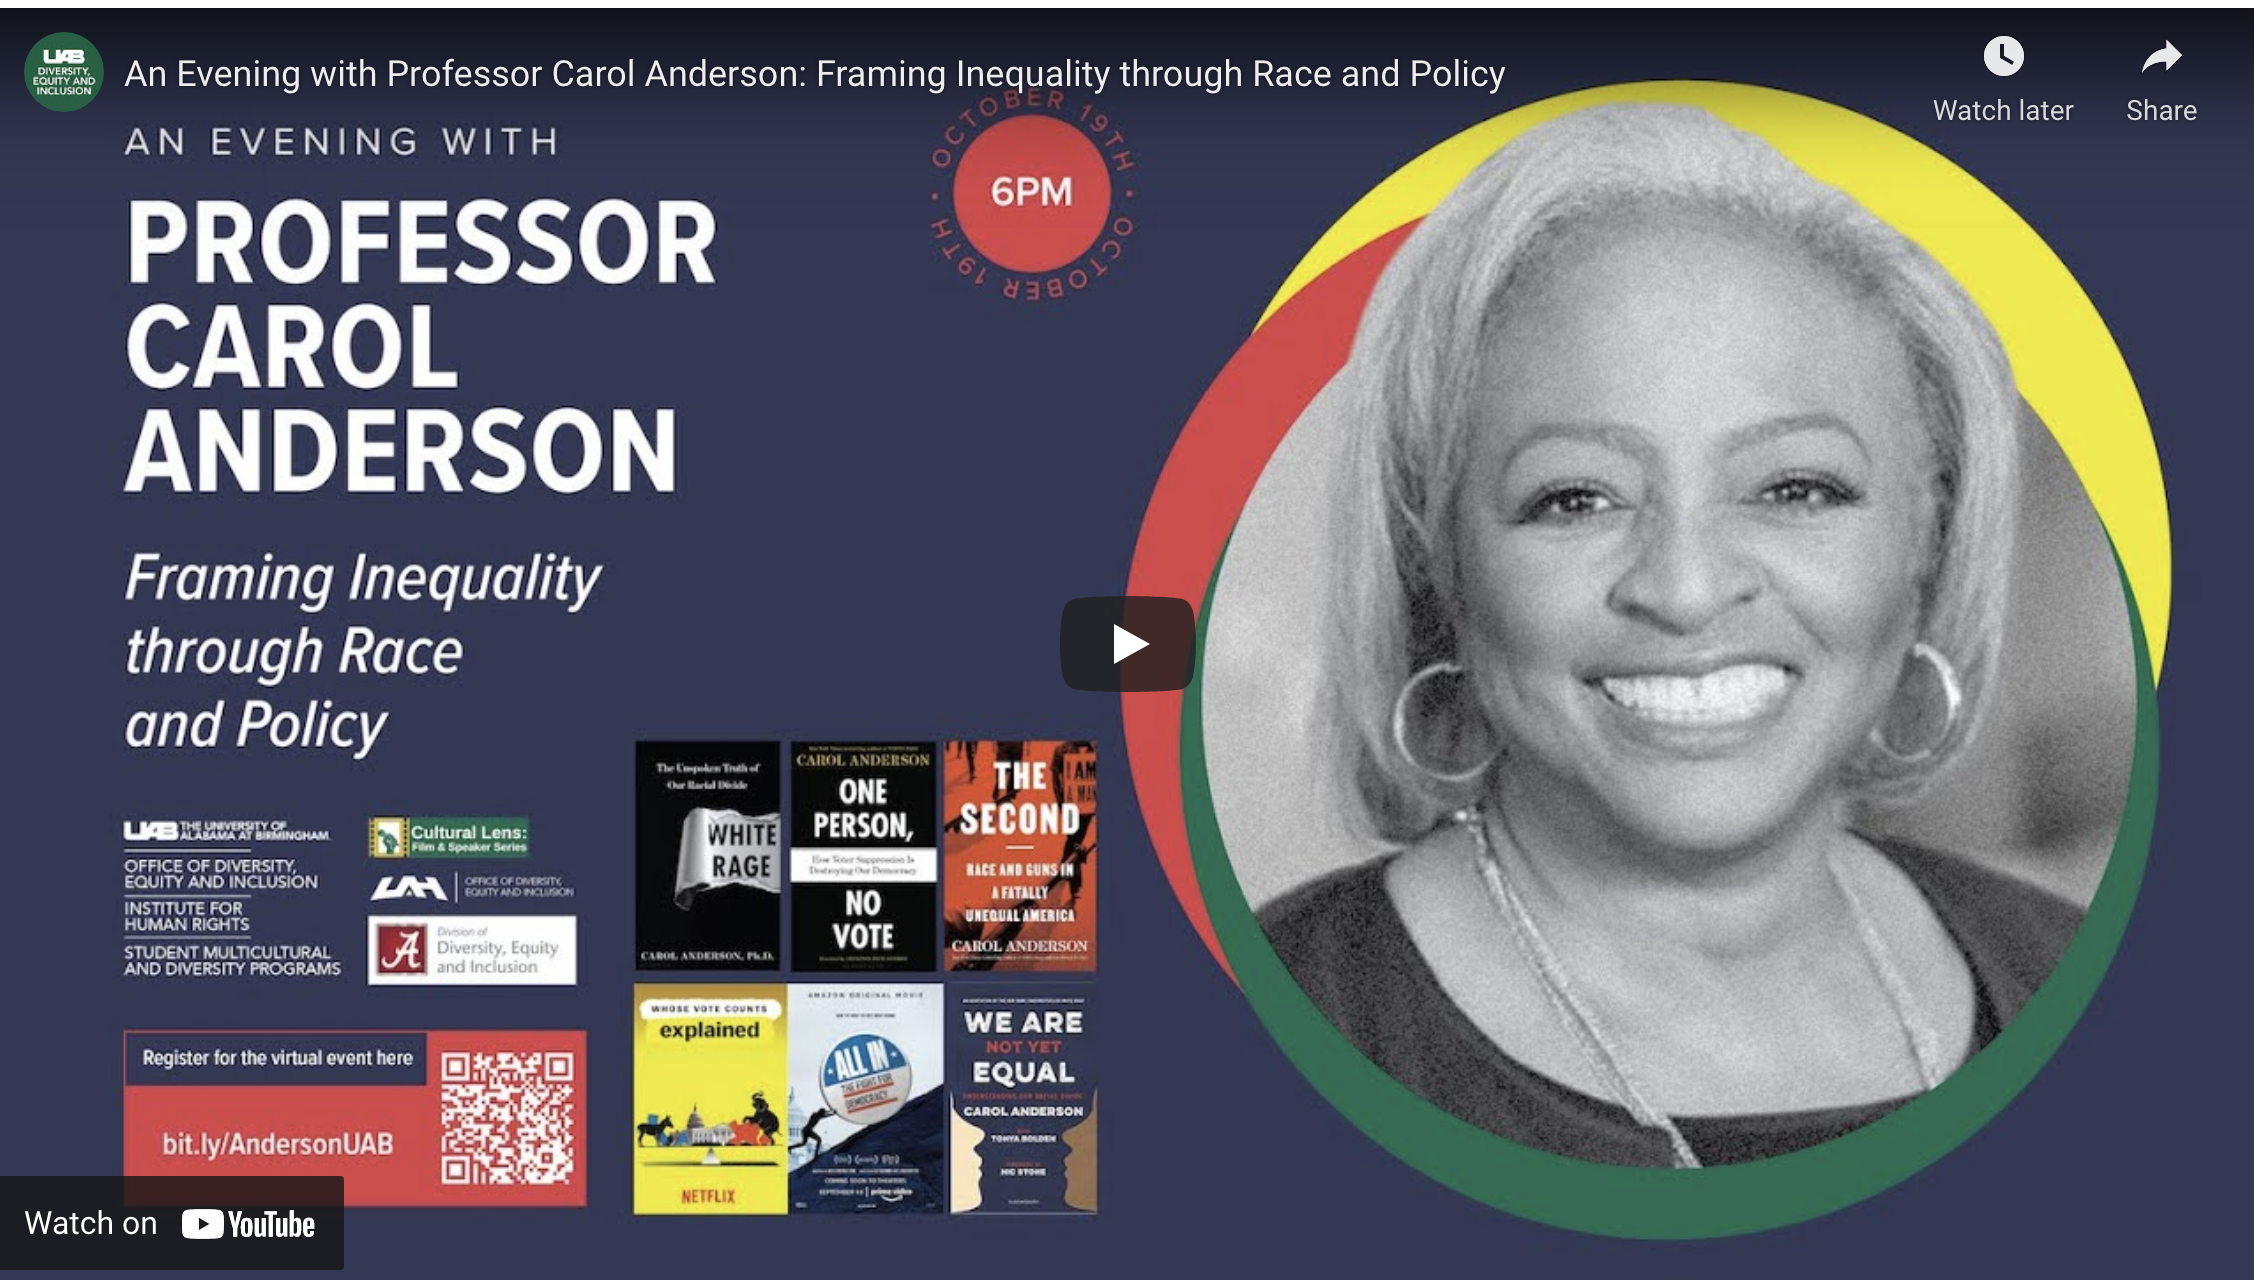 An Evening with Professor Carol Anderson: Framing Inequality through Race and Policy